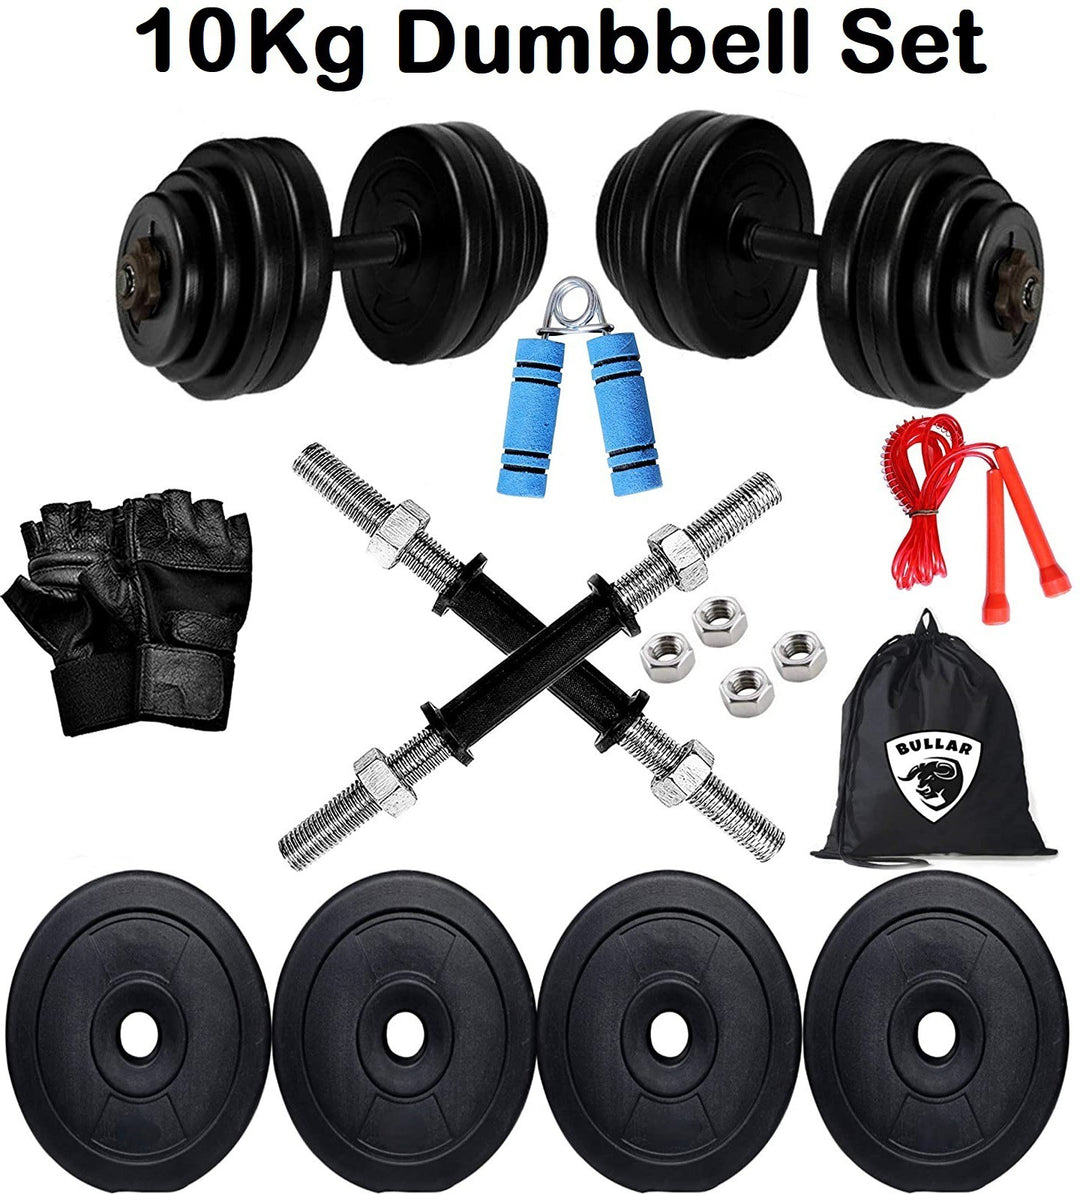 10Kg Dumbbell Set | Weight Plates | Weight Plates for Home Gym | Gym Weights